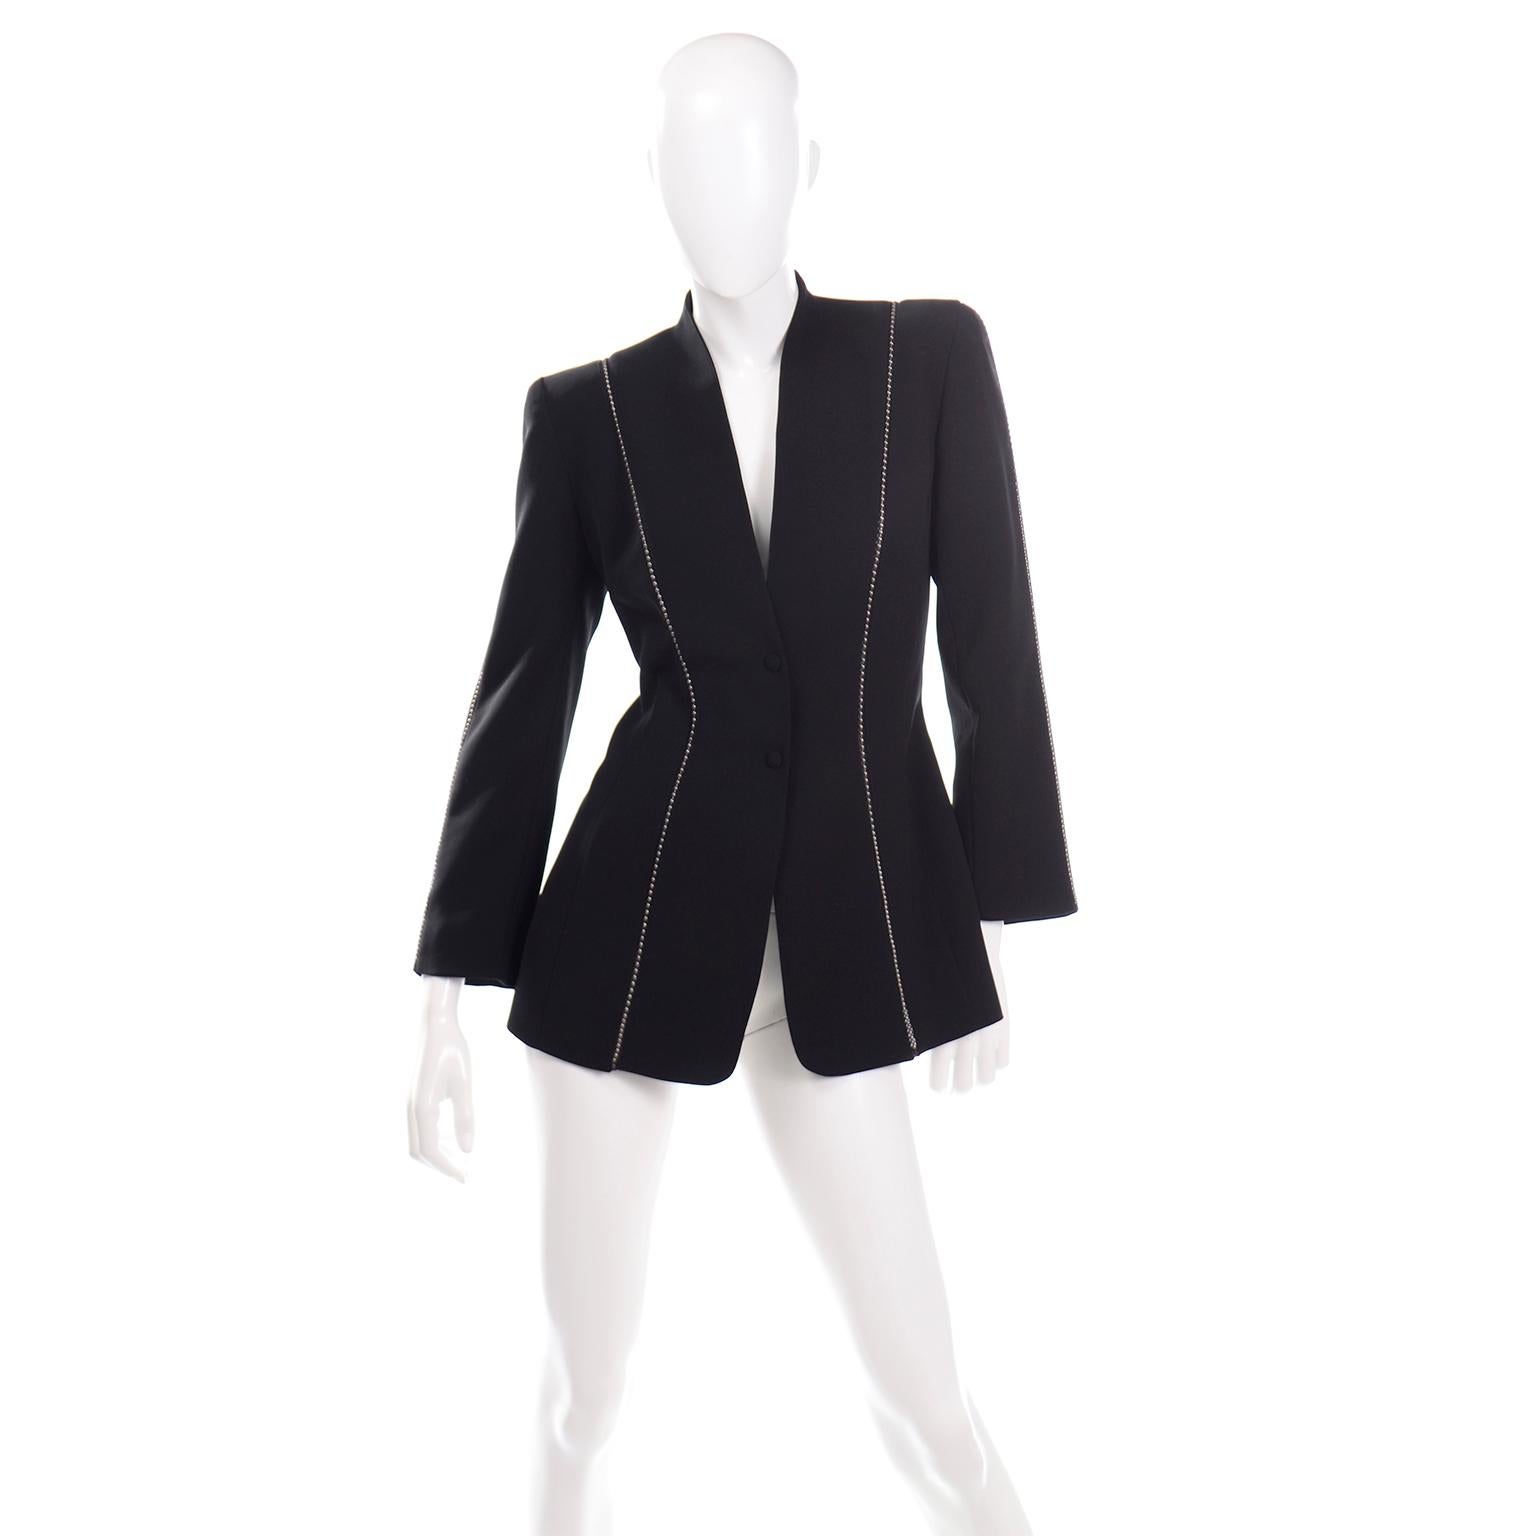 This vintage Thierry Mugler black structured blazer has a very unique metal ball chain detail along the front, back and sleeves. The ball chain is covered by sheer black silk. This style of blazer is similar to a lot of Thierry Mugler's blazers,